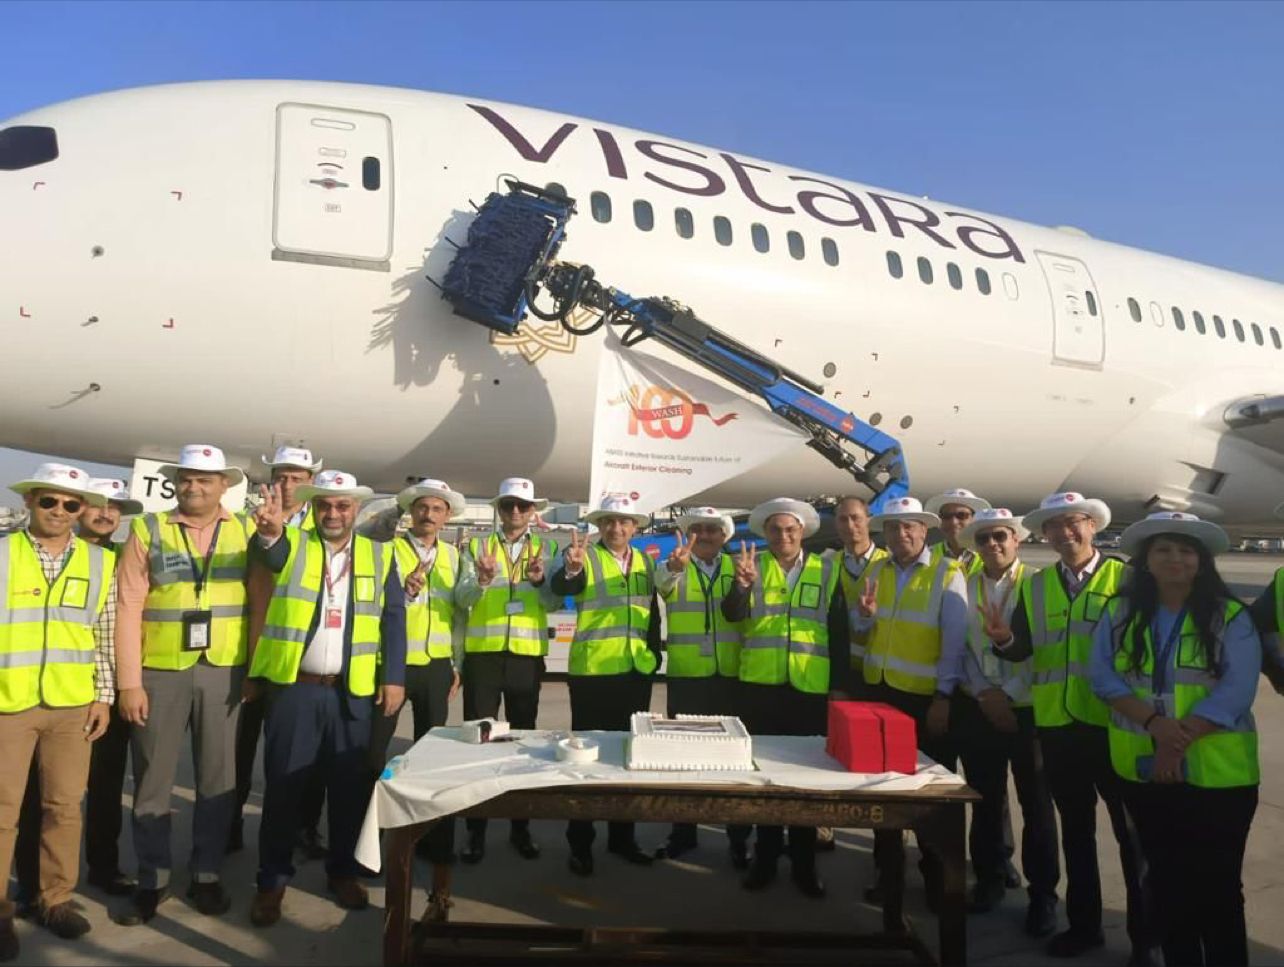 AISATS Delivers 100 Automated Aircraft Exterior Cleanings for Vistara